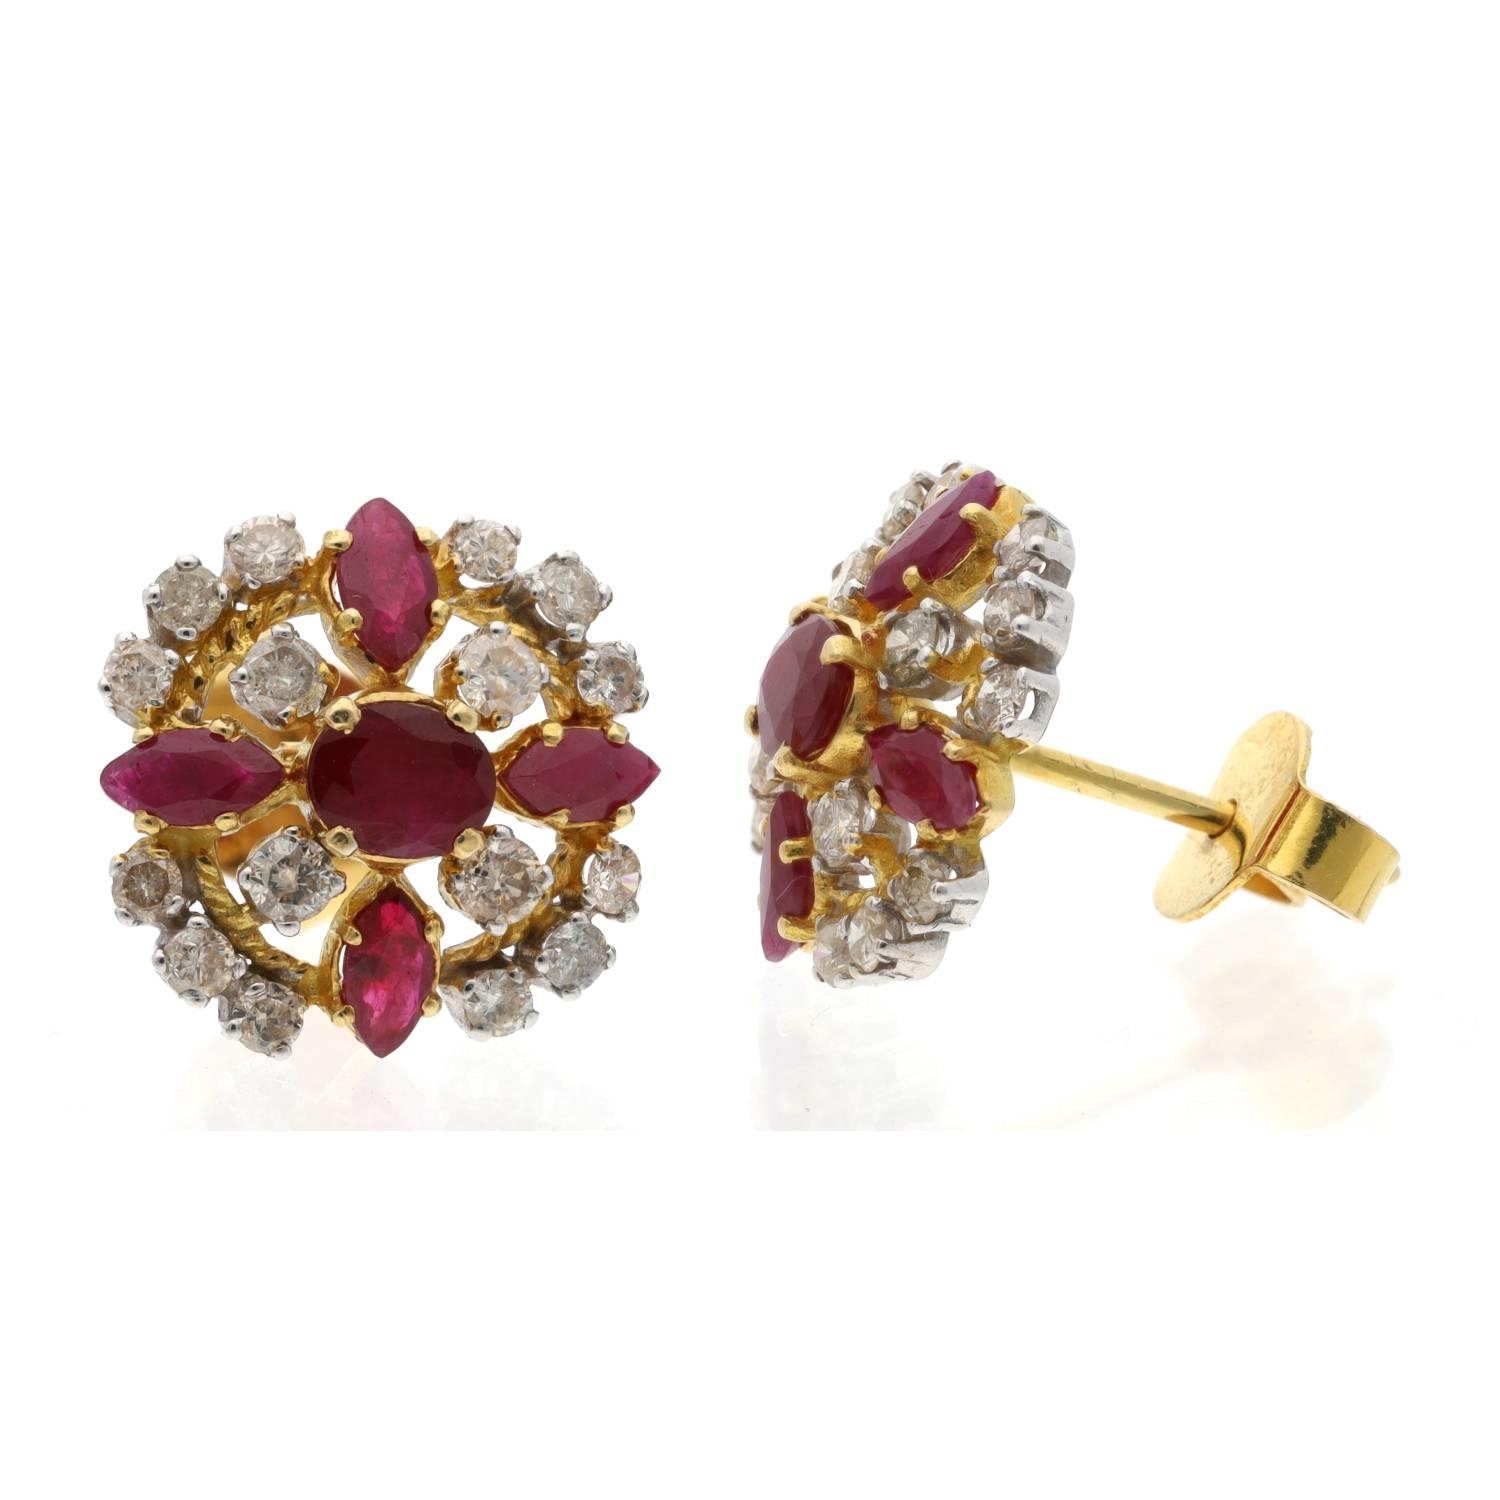 Pair of attractive bicolour gold ruby and diamond cluster earrings, post backs, 4.9gm, 16mm (635)